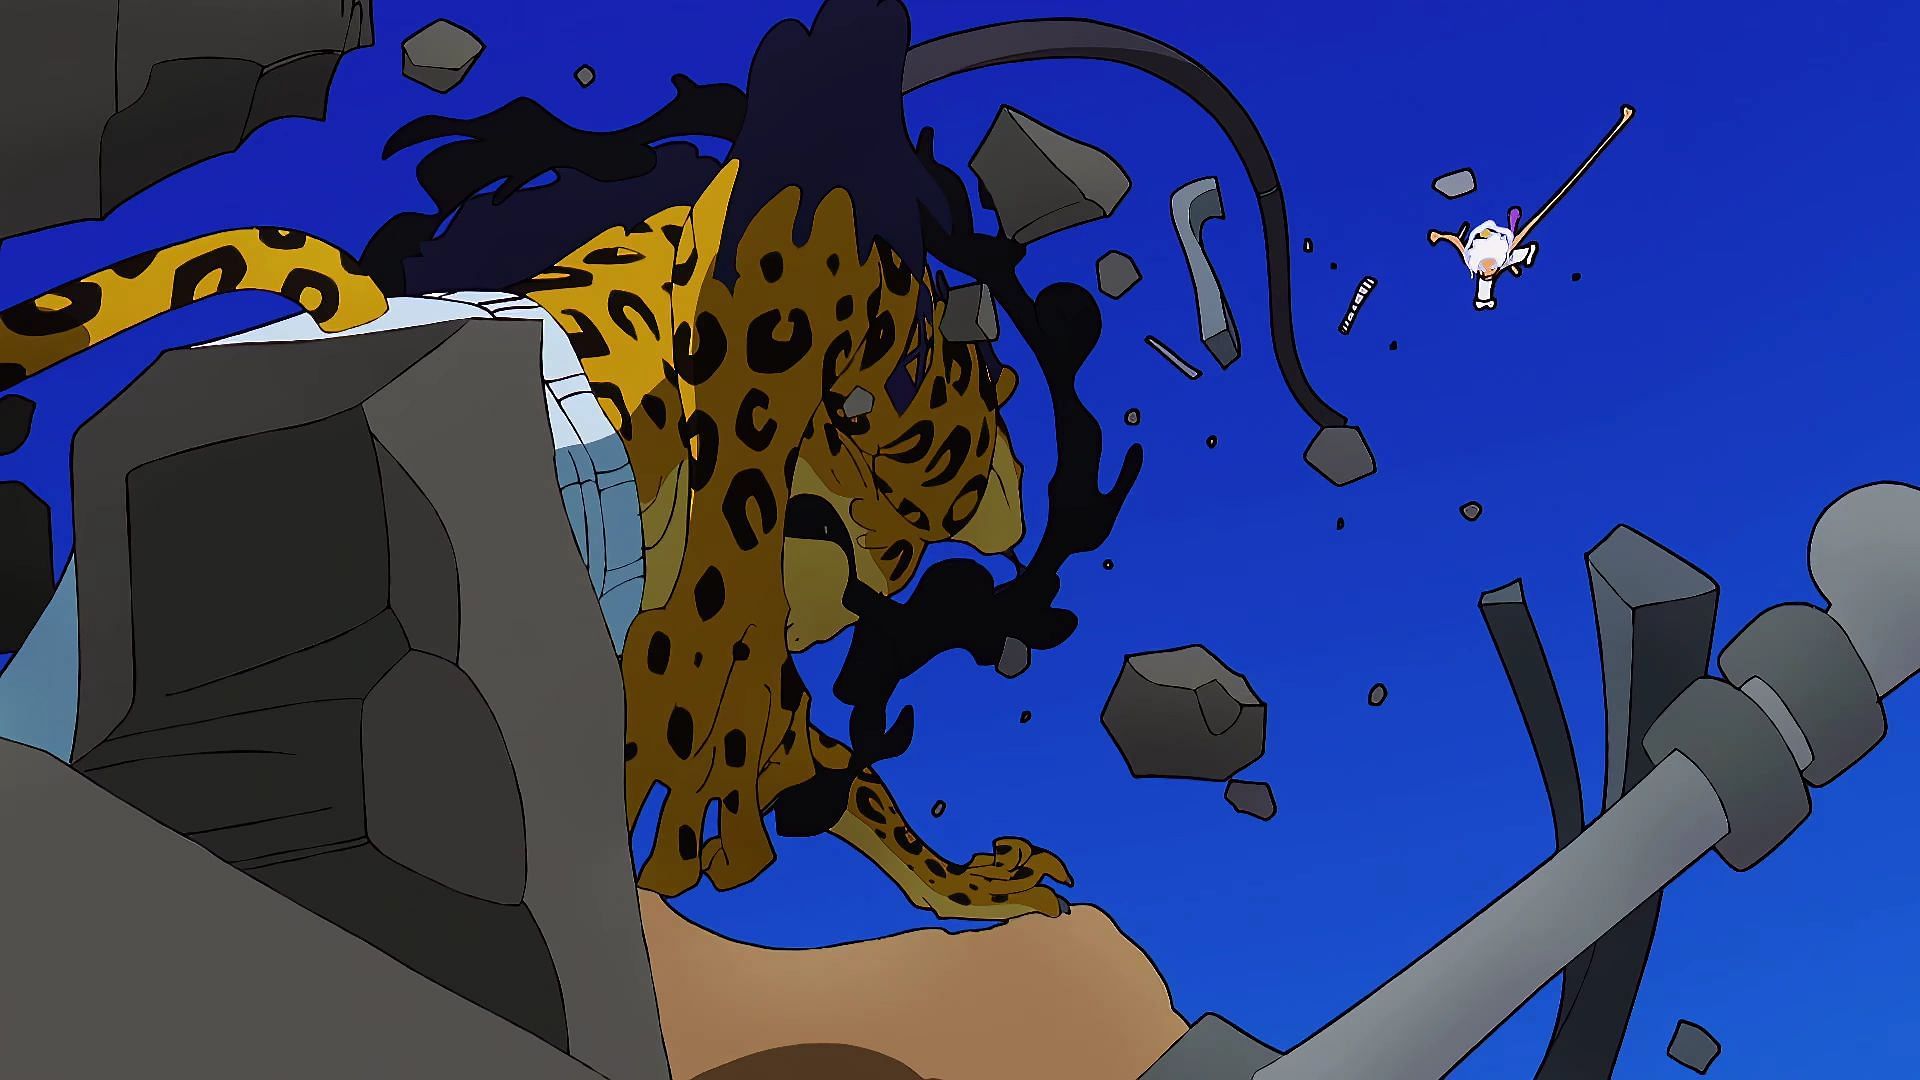 Awakened Lucci vs Gear 5 Luffy as seen in the One Piece anime (Image via Toei Animation)